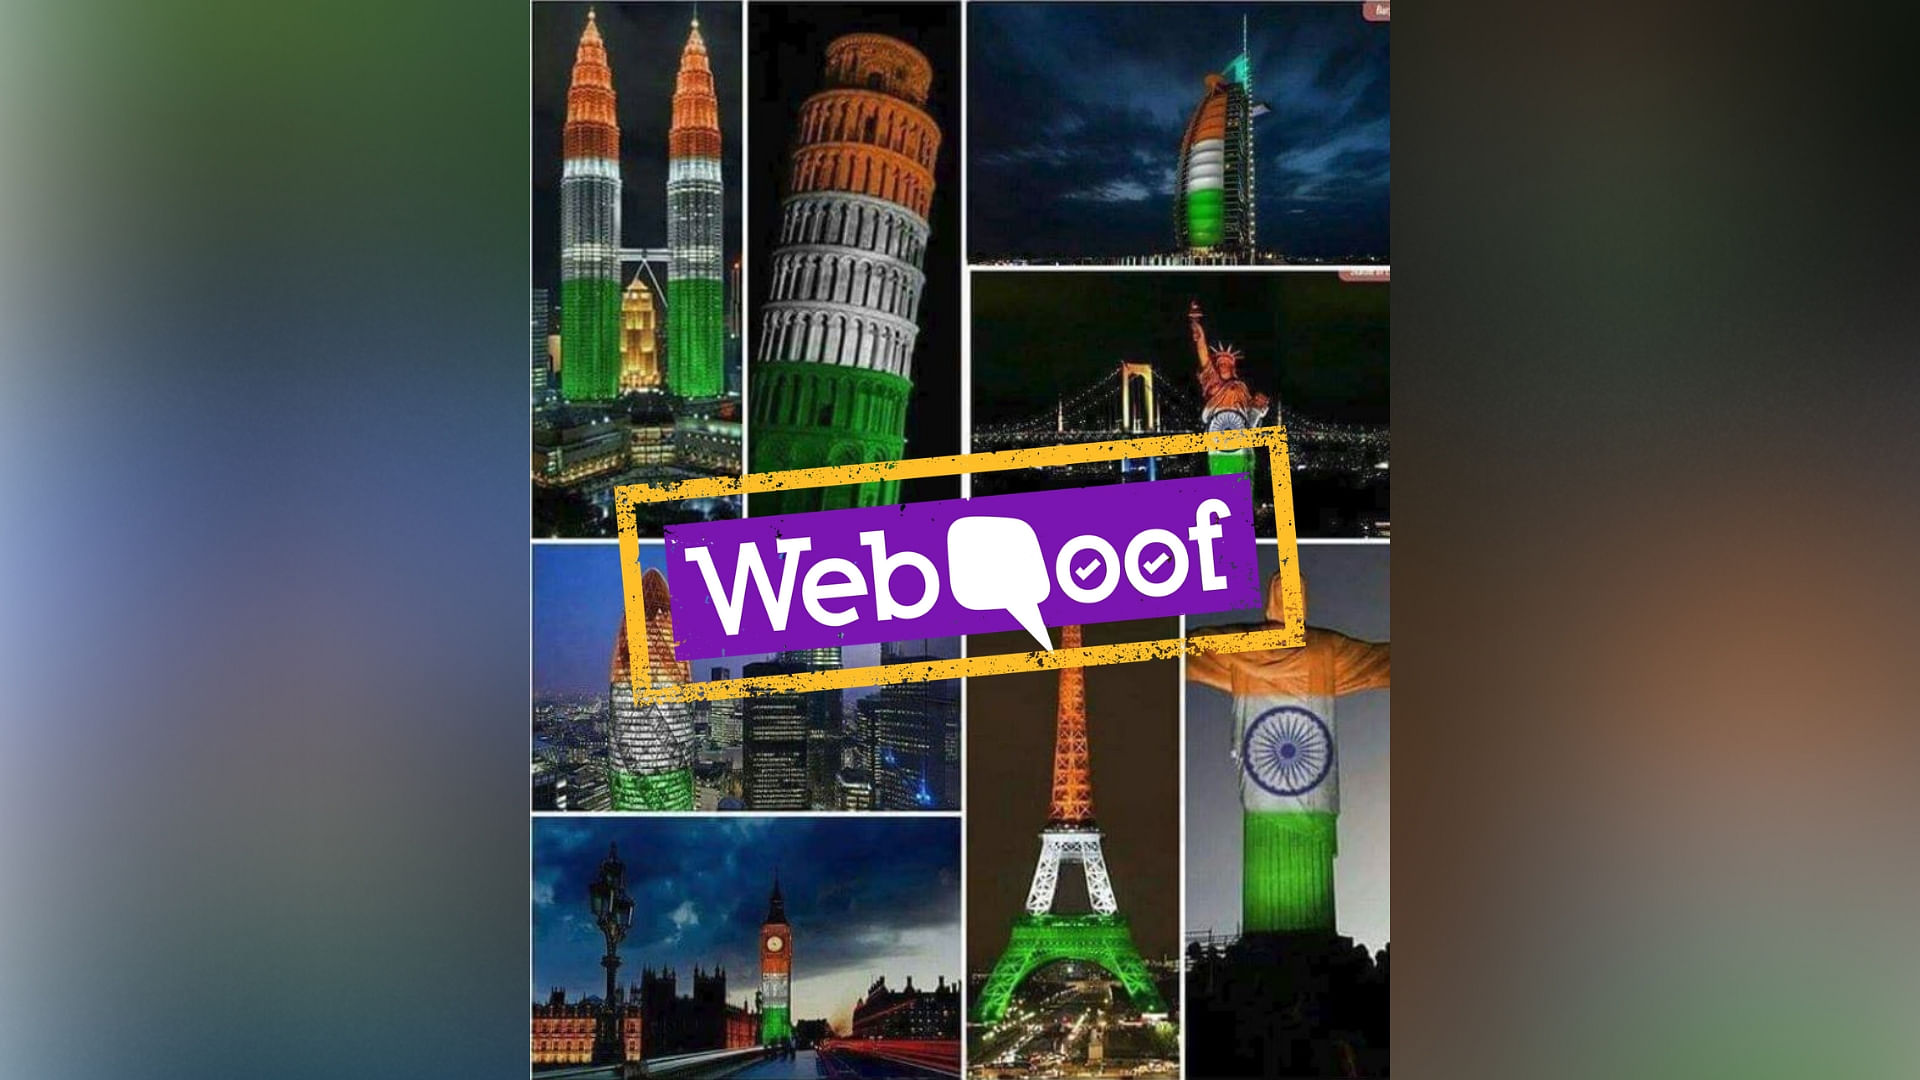 Edited pictures of famous monuments lit in tri-colour go viral 2 years after they were first posted.&nbsp;